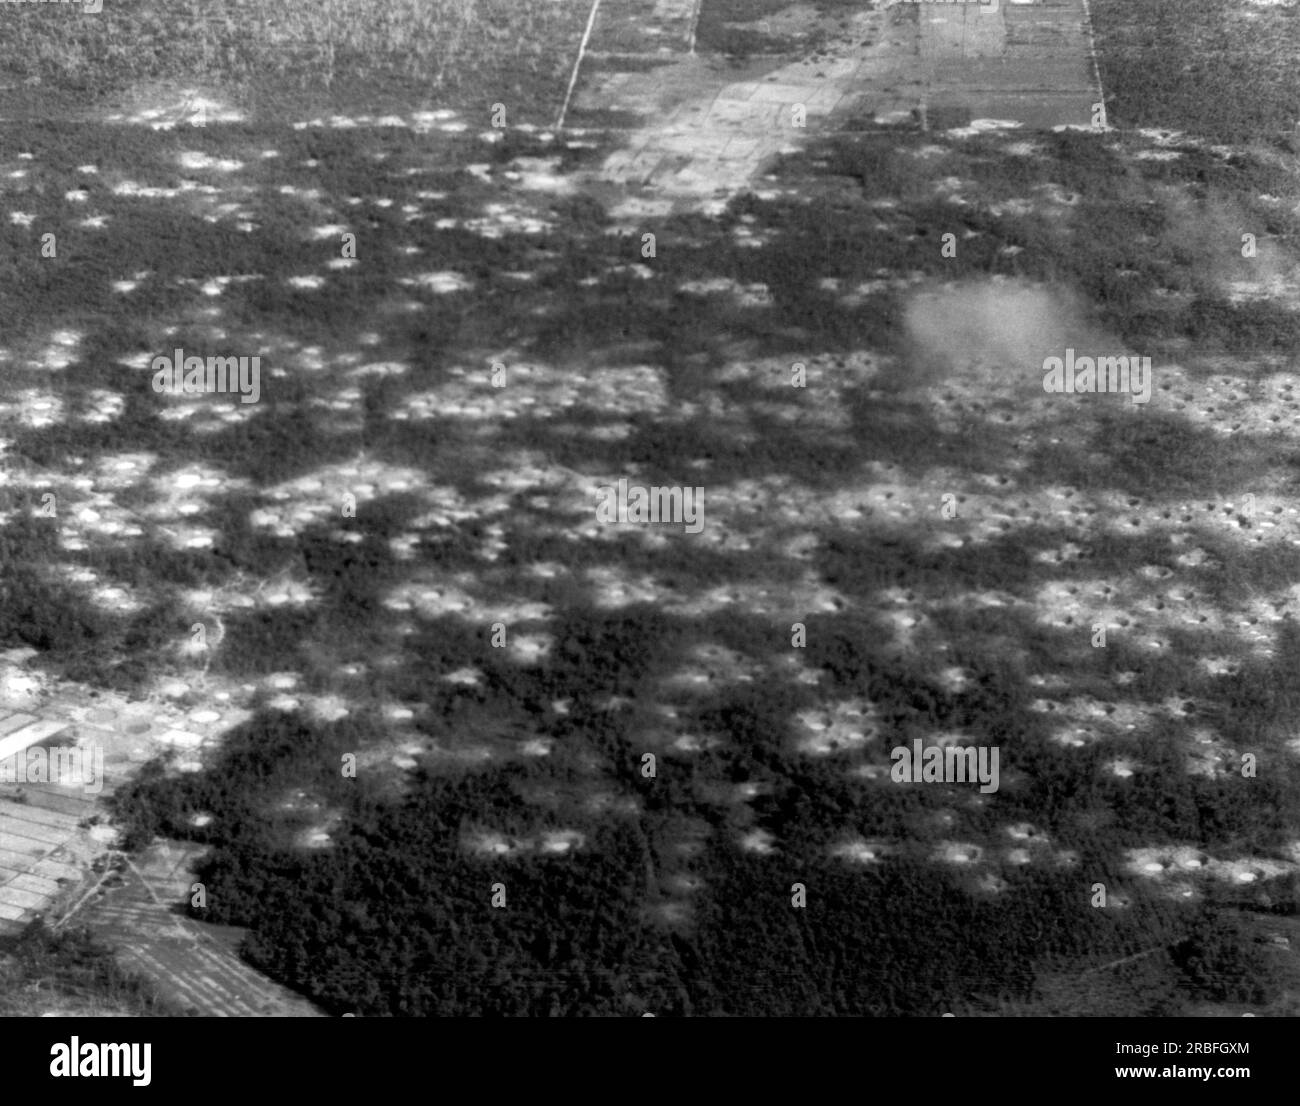 Vietnam: February 22, 1966 An area of the 'Zone D' just north of the MIchelin Rubber Plantation that has been reduced to a 'moonscape' by the precision bombing U.S. Air Force B-52 Stratofortress sorties. Stock Photo